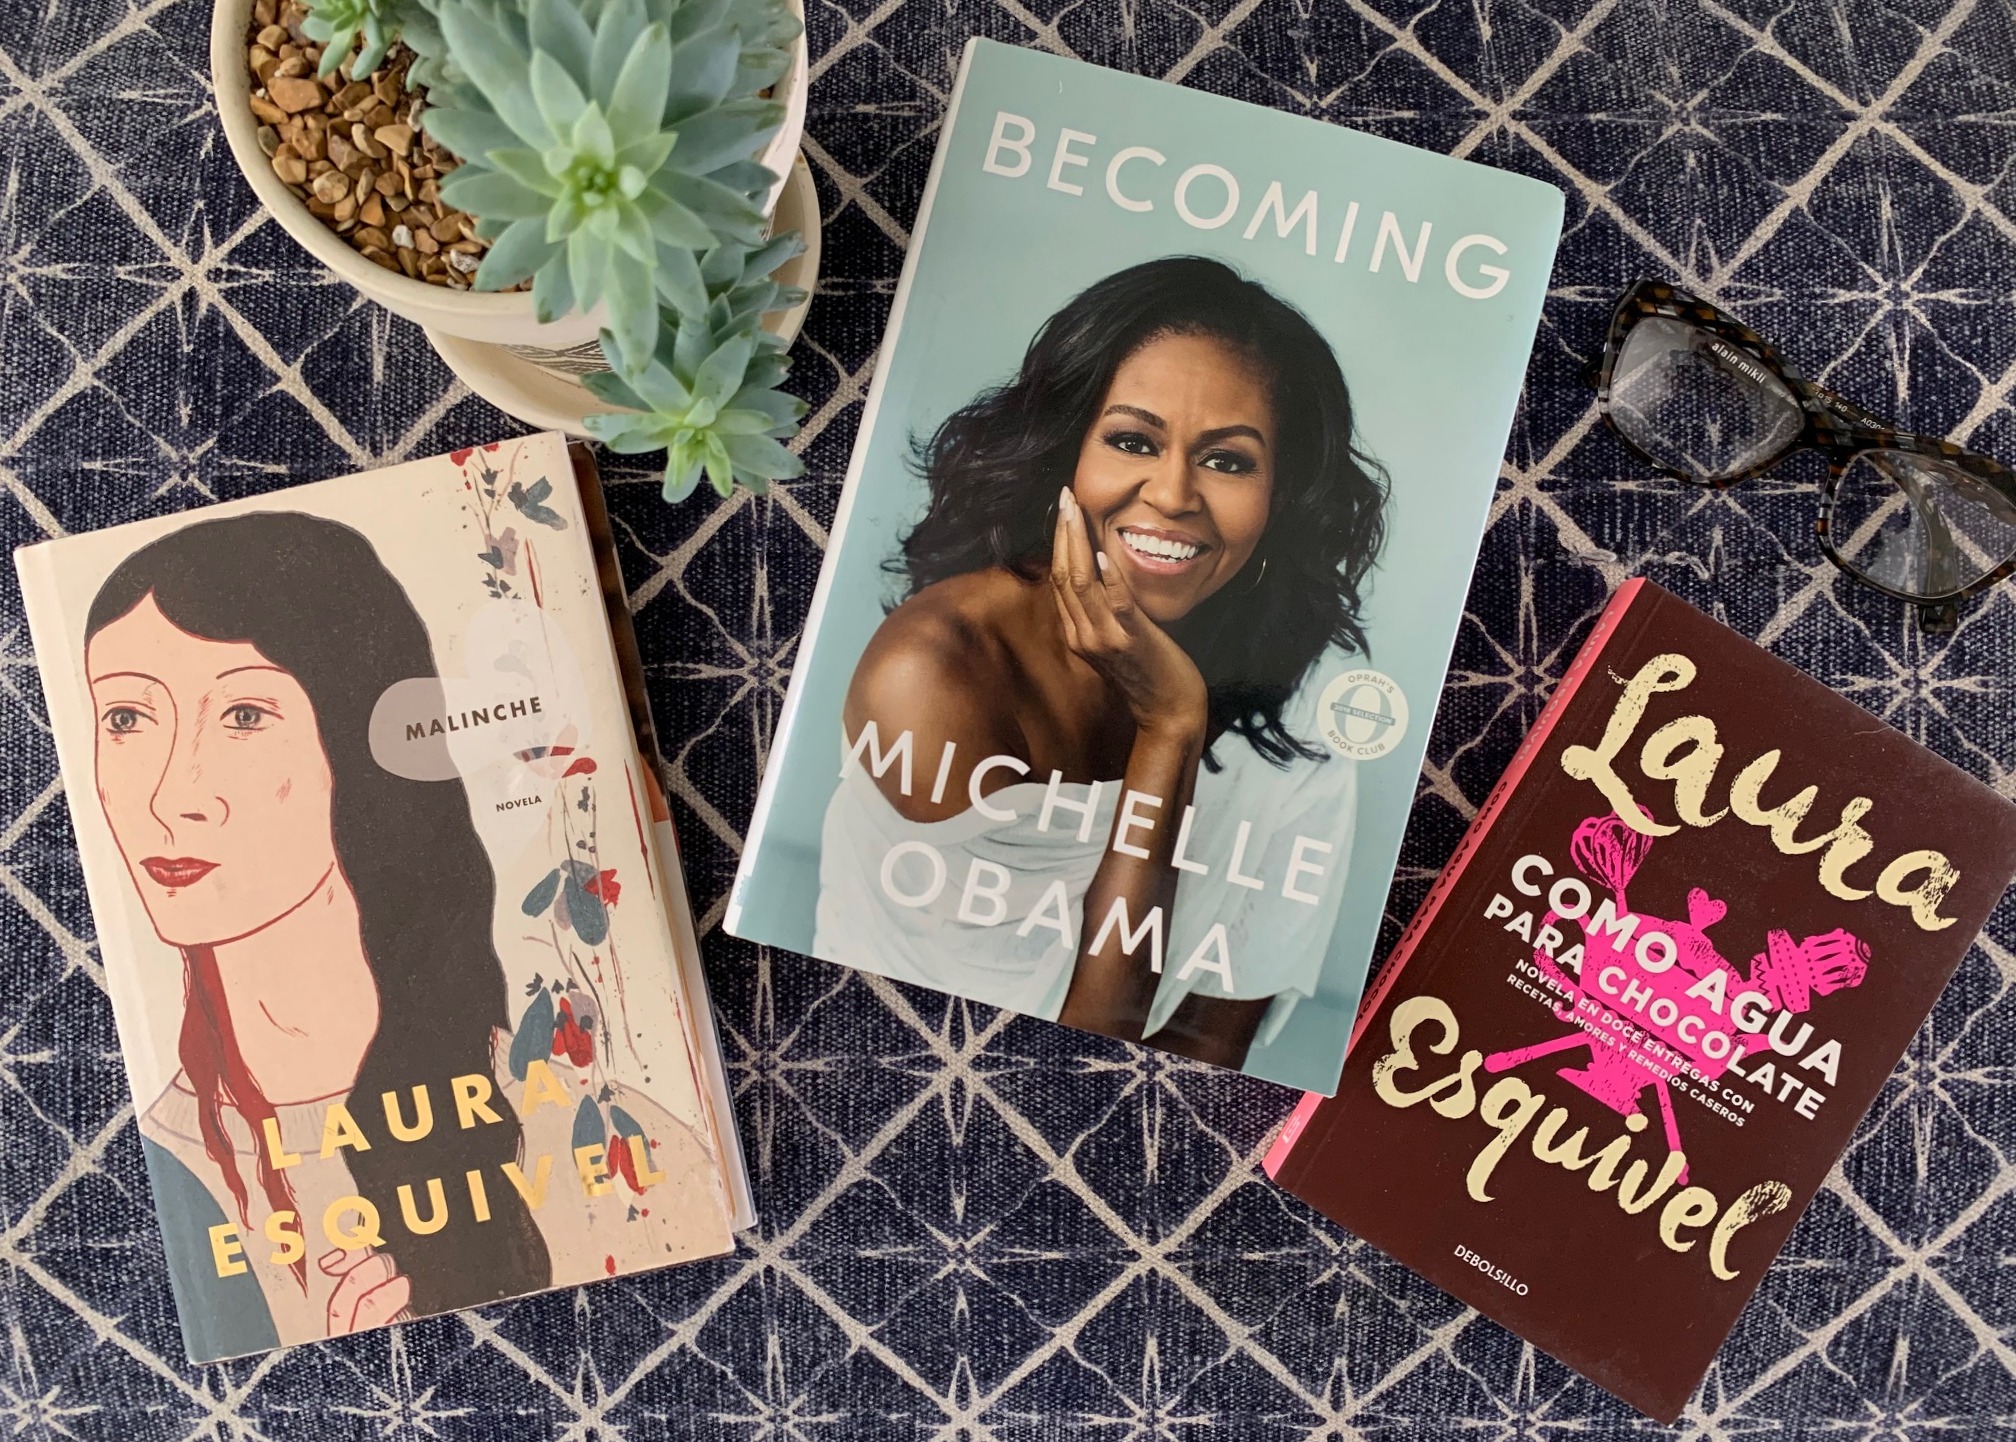 National Reading Month + Women’s History Month: Lola’s Bilingual Reading List